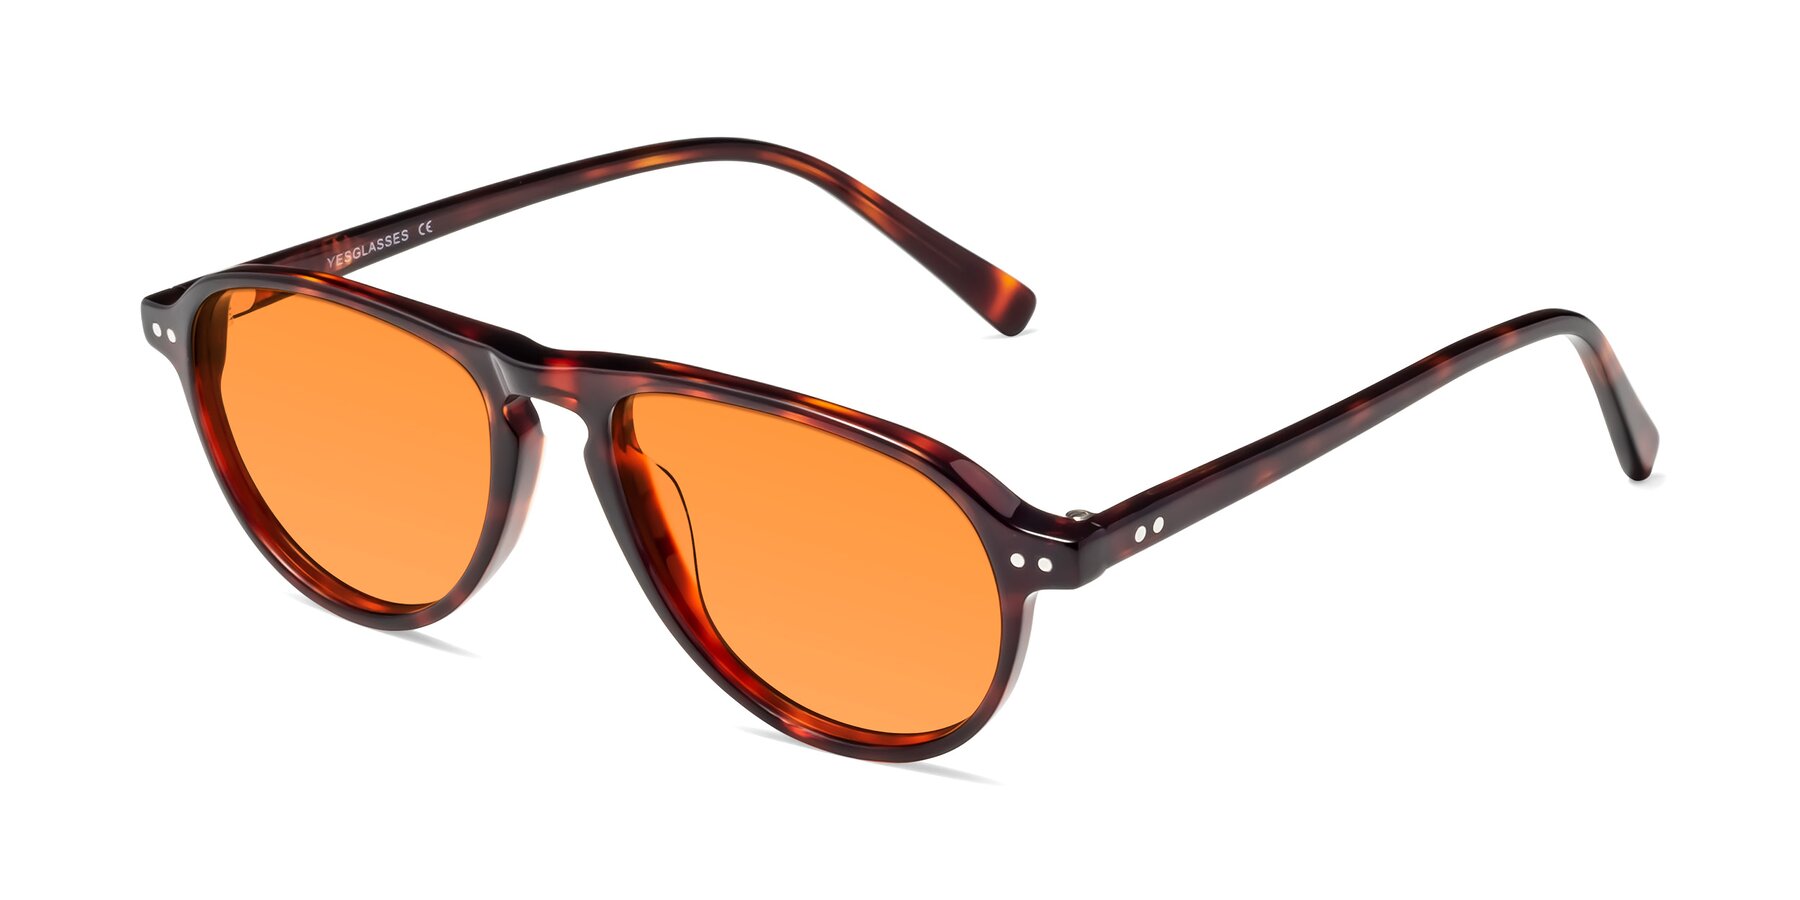 Angle of 17544 in Burgundy Tortoise with Orange Tinted Lenses